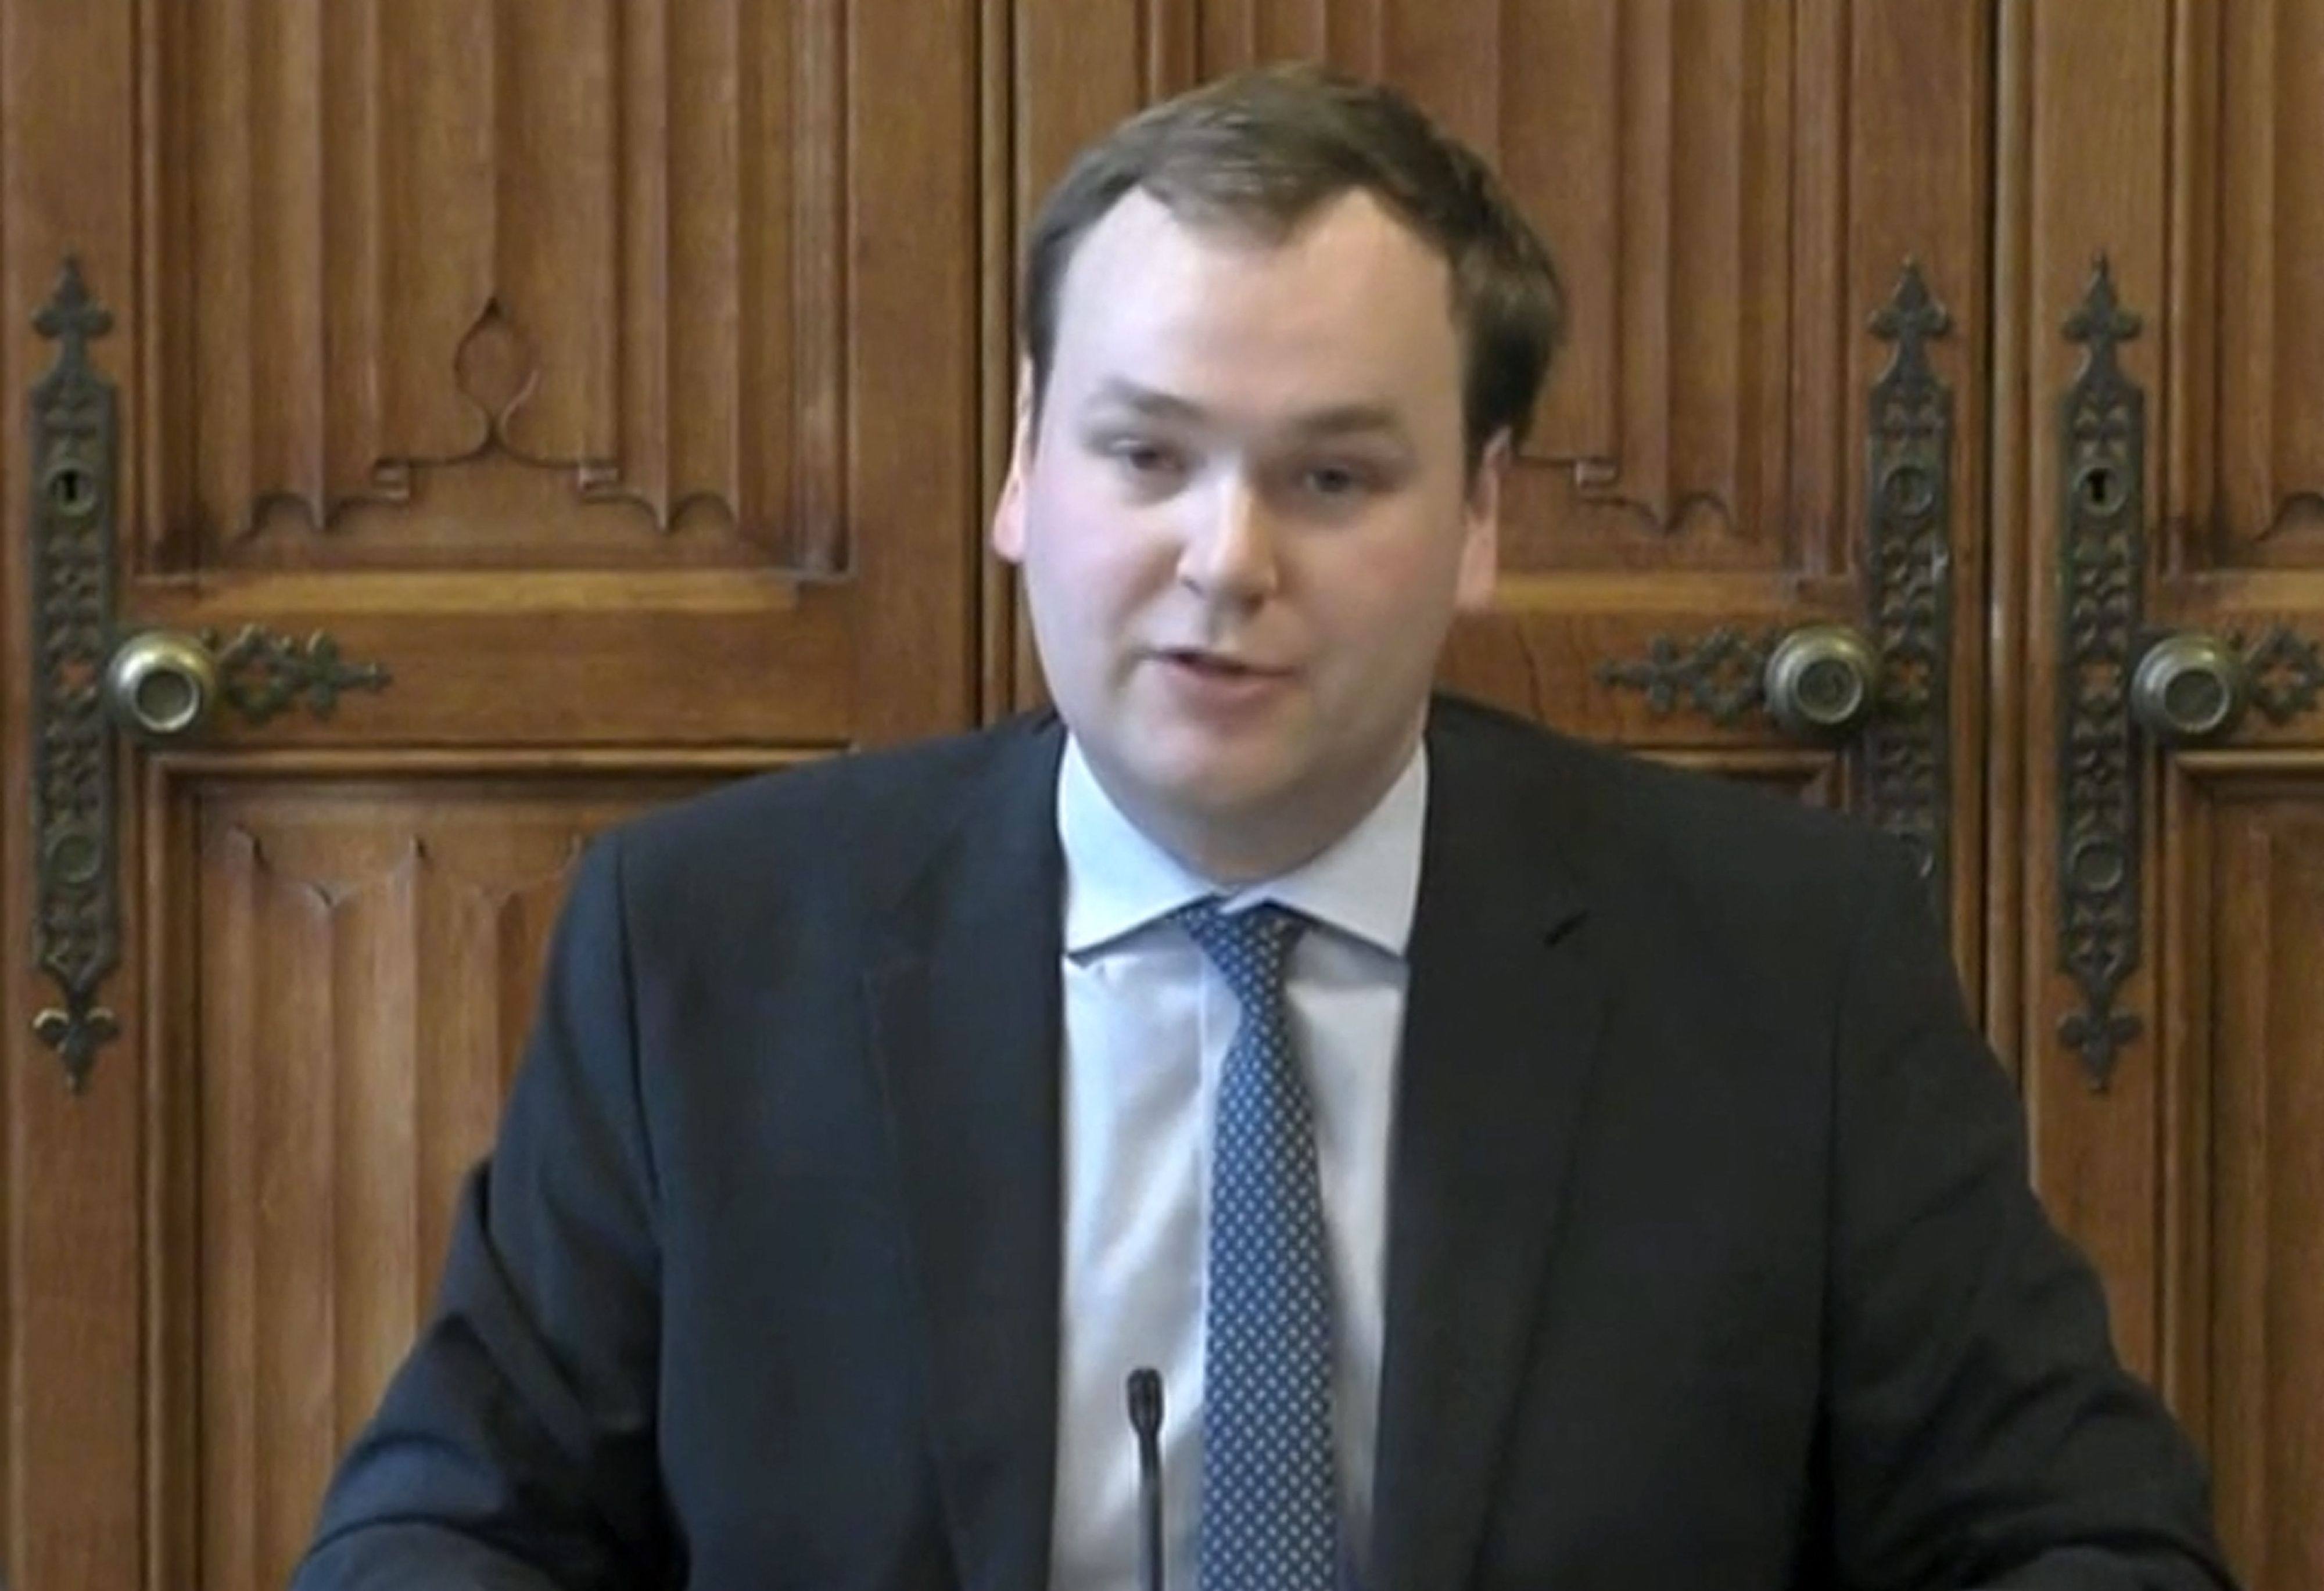 A video grab from footage broadcast by the UK Parliament’s Parliamentary Recording Unit (PRU) shows Conservative MP William Wragg. Photo: AFP via PRU